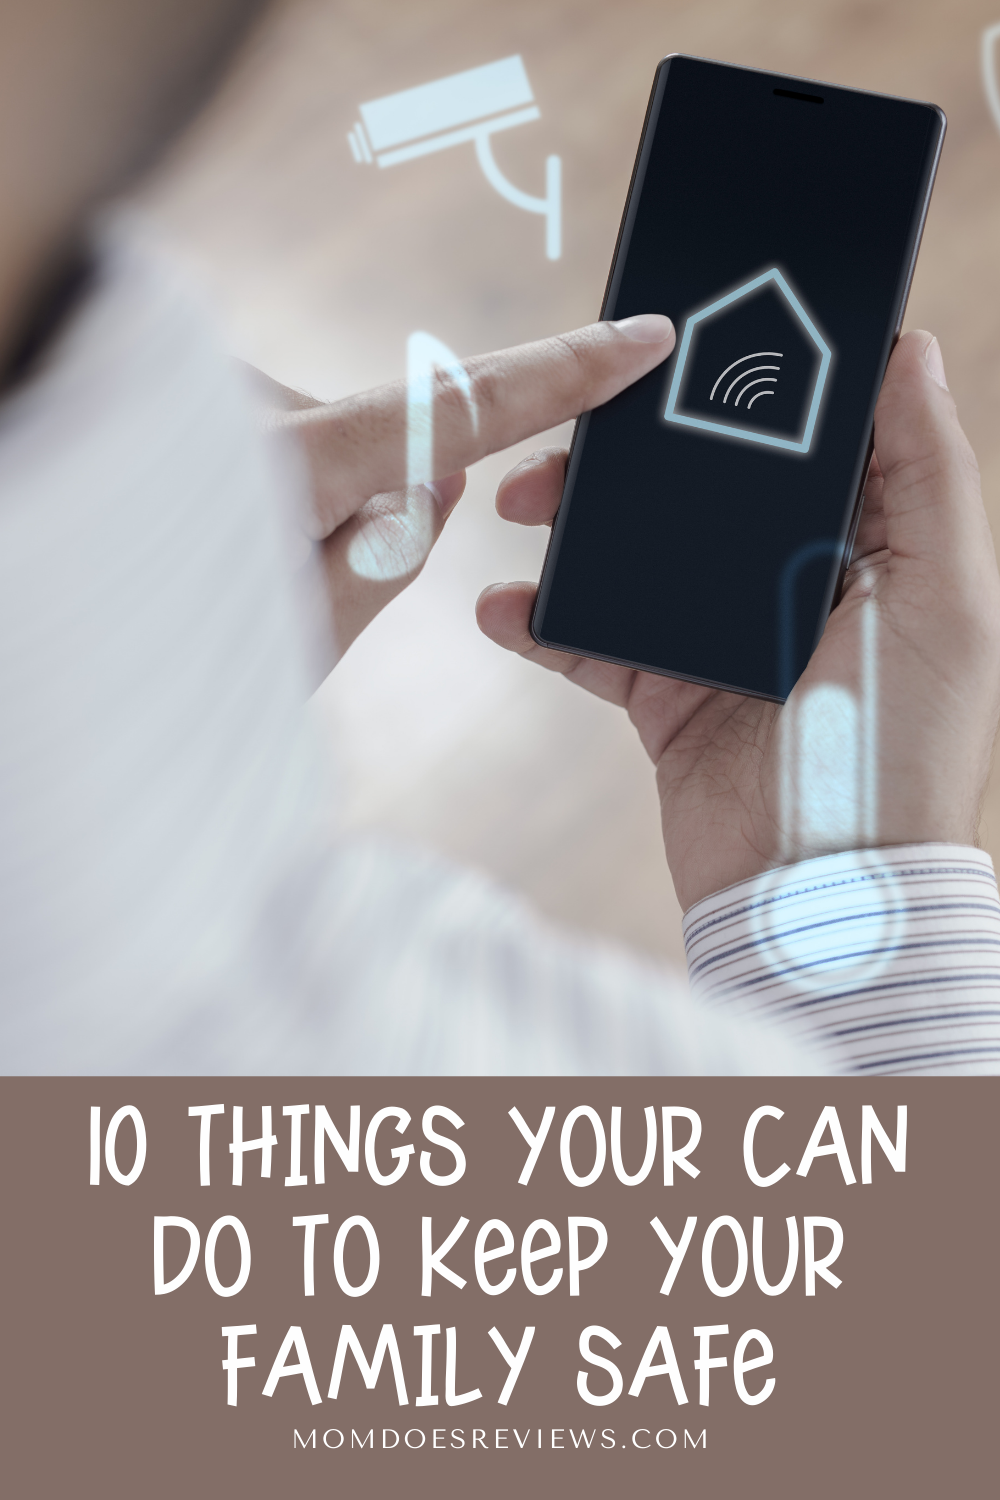 How To Keep Your Family And Home Safe: 10 Things You Can Do